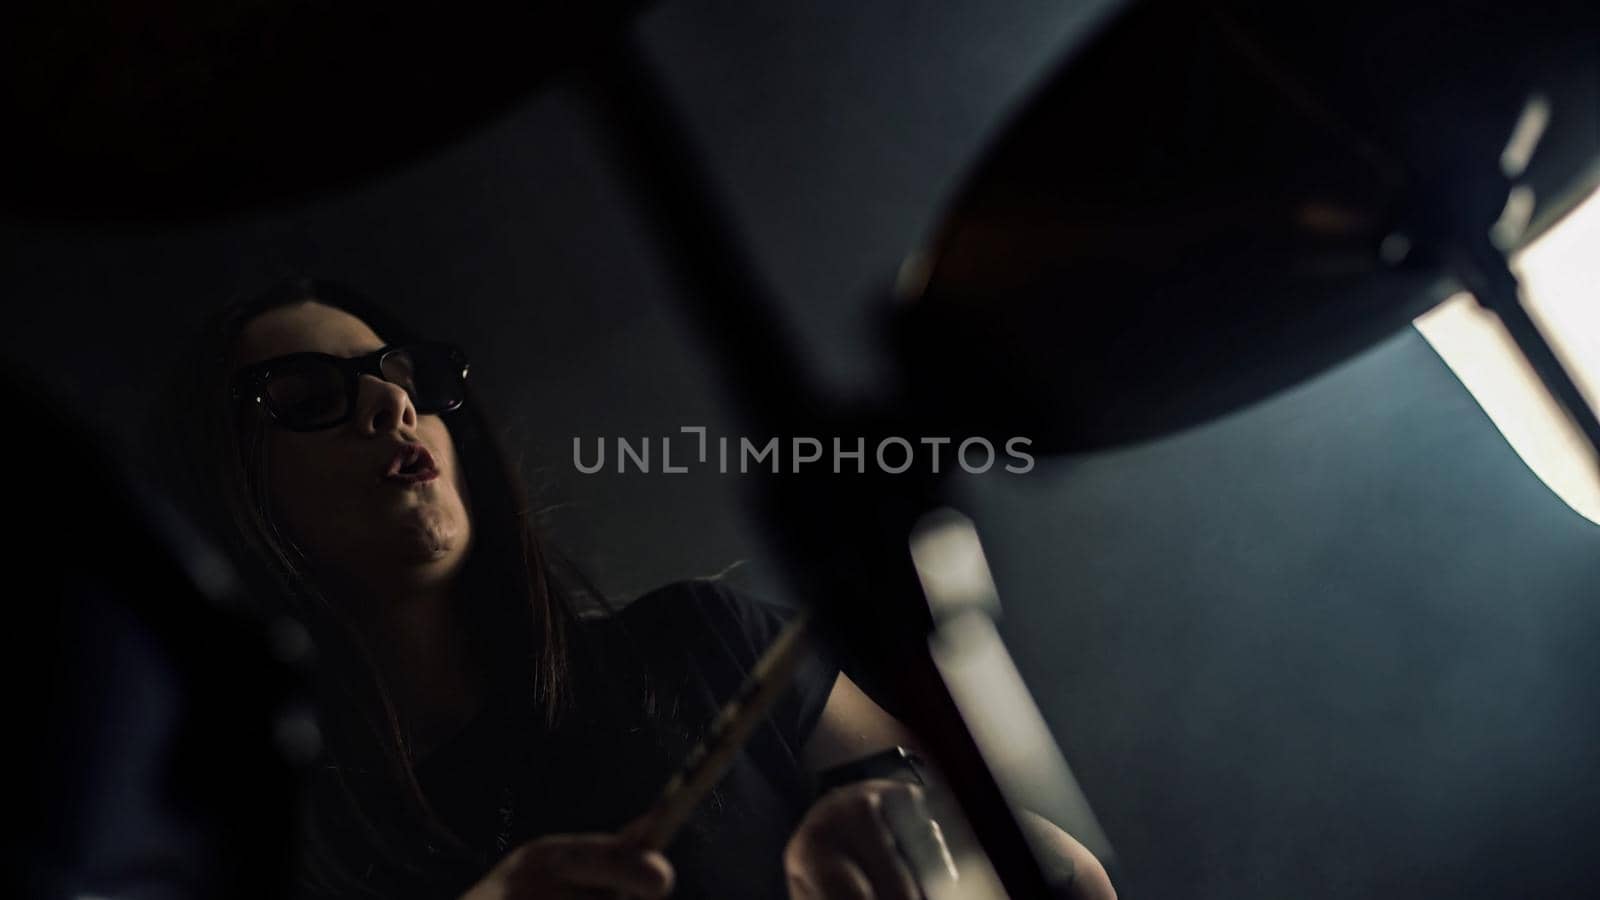 Young female drummer with spectacles plays a drum set holding drumstick in hands